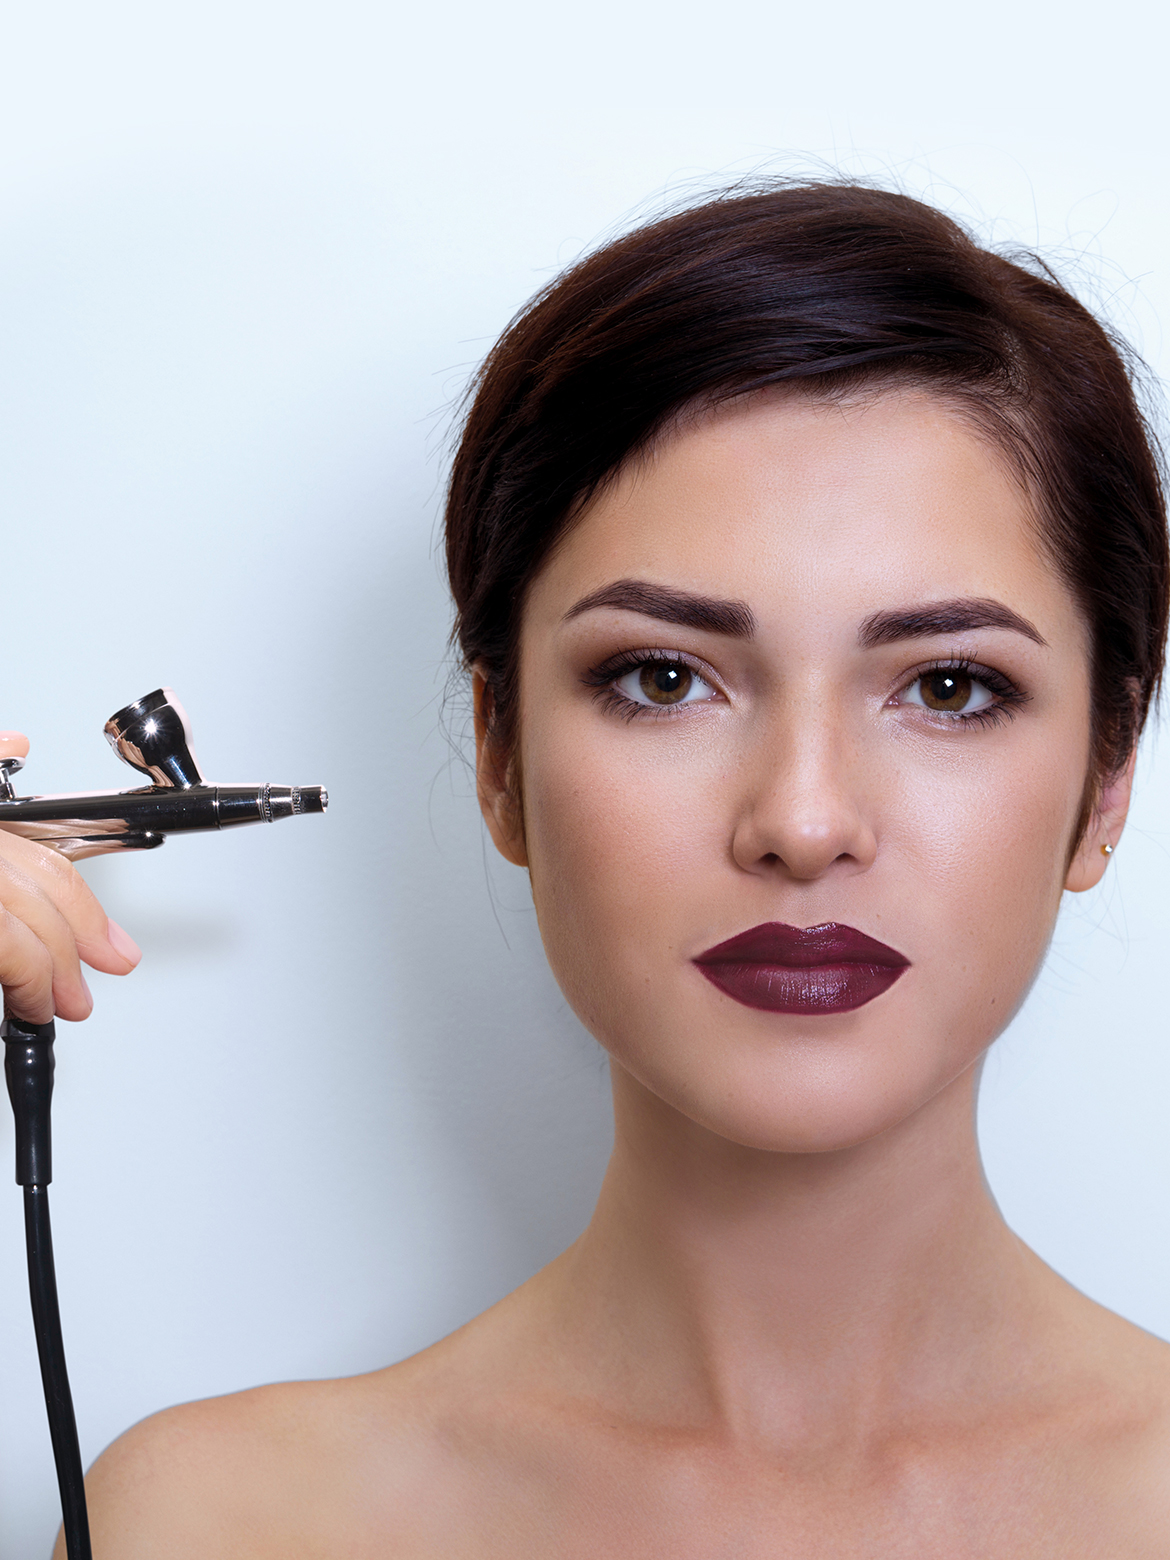 All About Airbrush Makeup - SUGAR Cosmetics